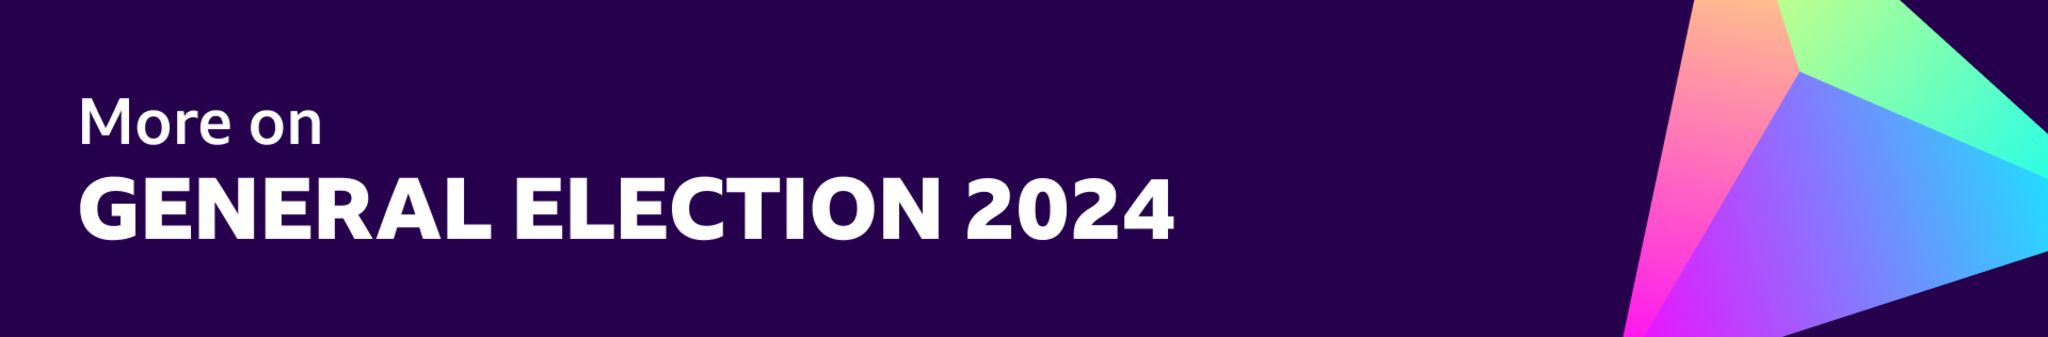 BBC general election branding on a purple background